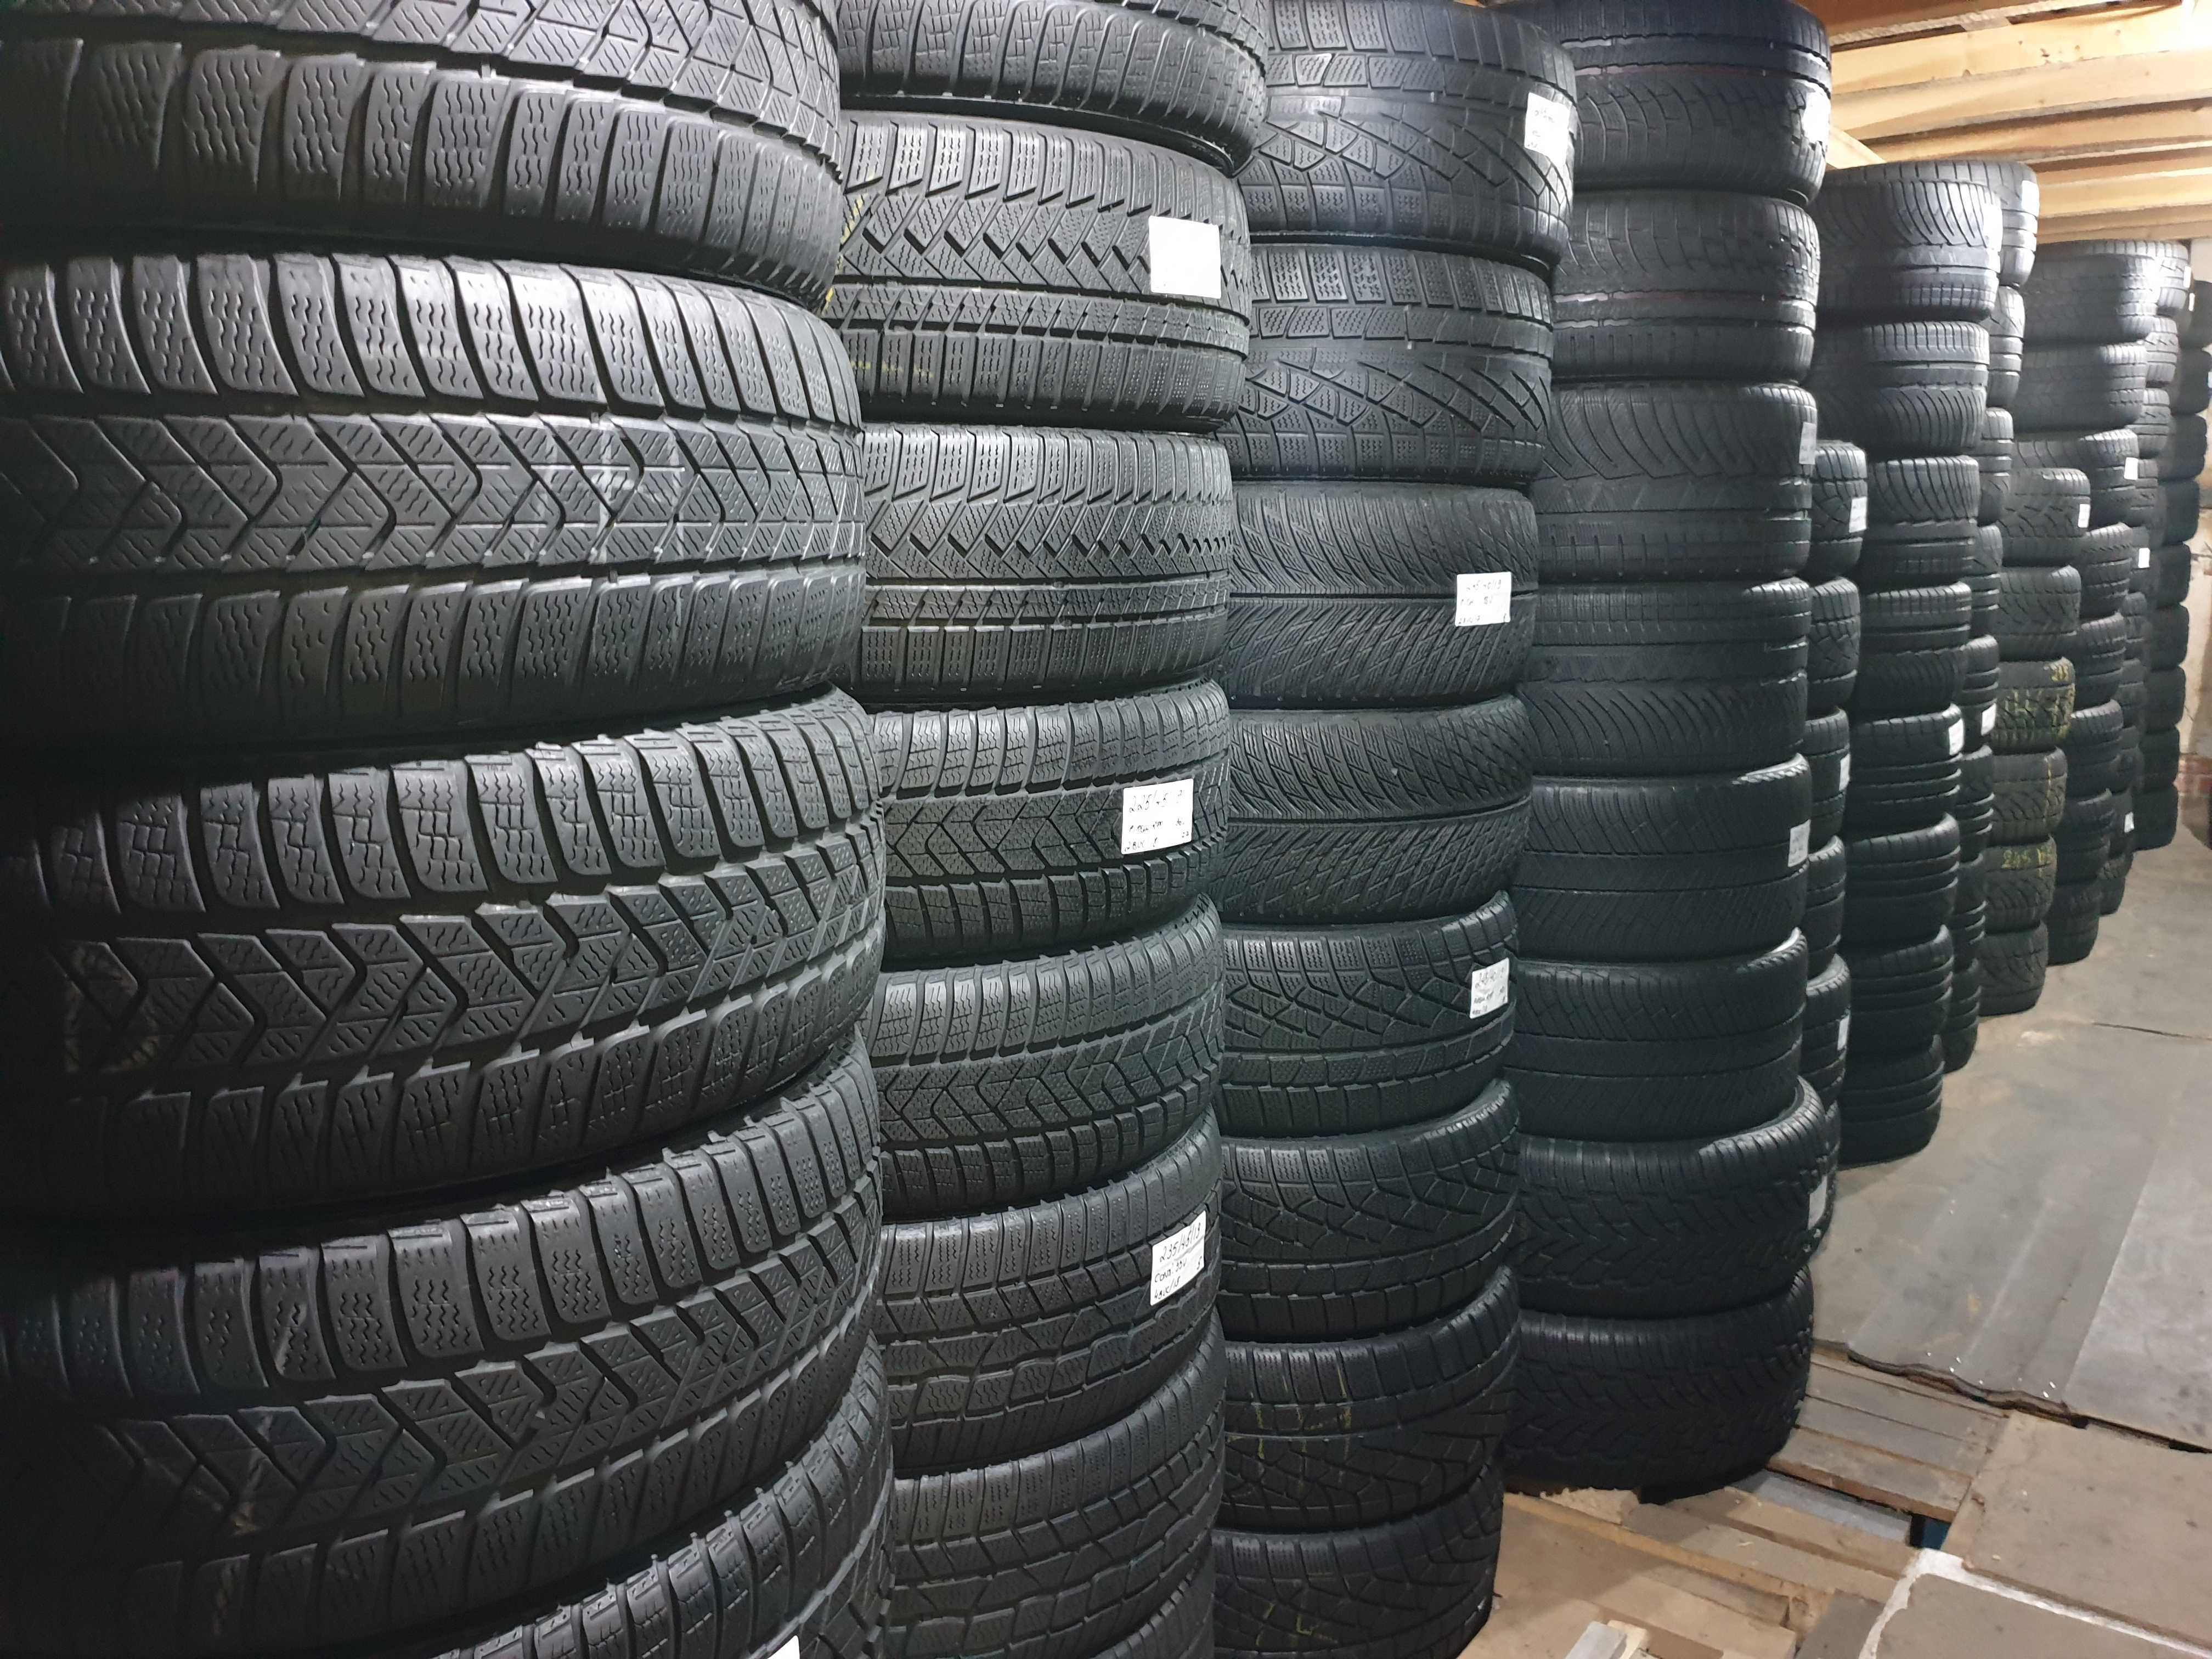 Anvelope Second Hand Goodyear Vara-225/45 R18 91V,in stoc R17/19/20